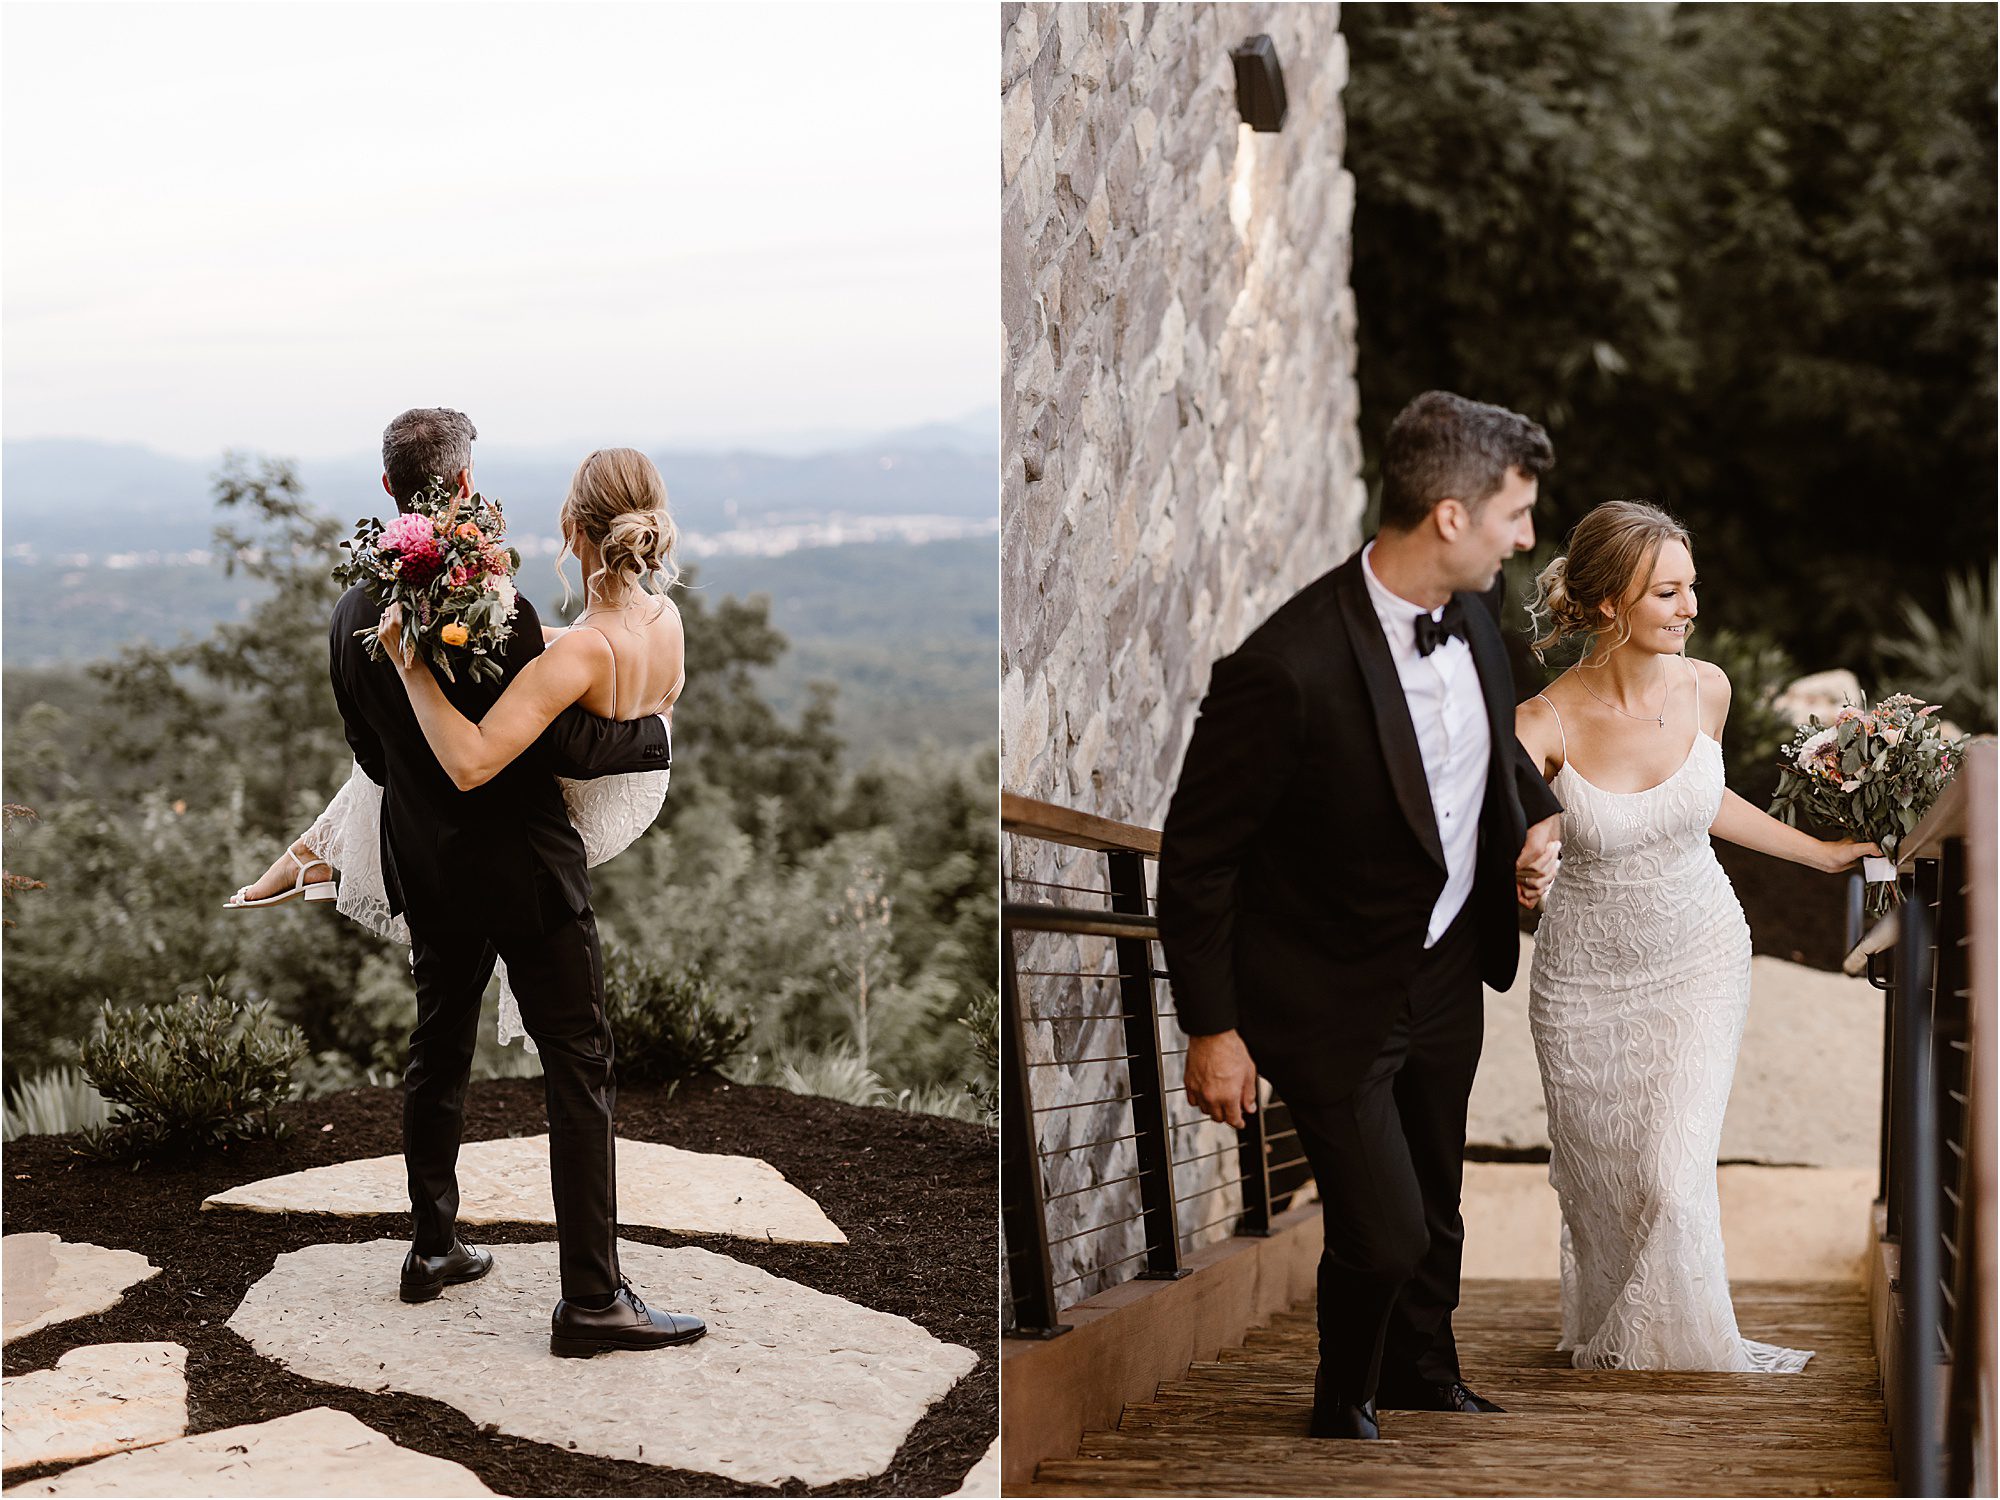 Modern wedding with champagne vibes at wedding venue in Tennessee